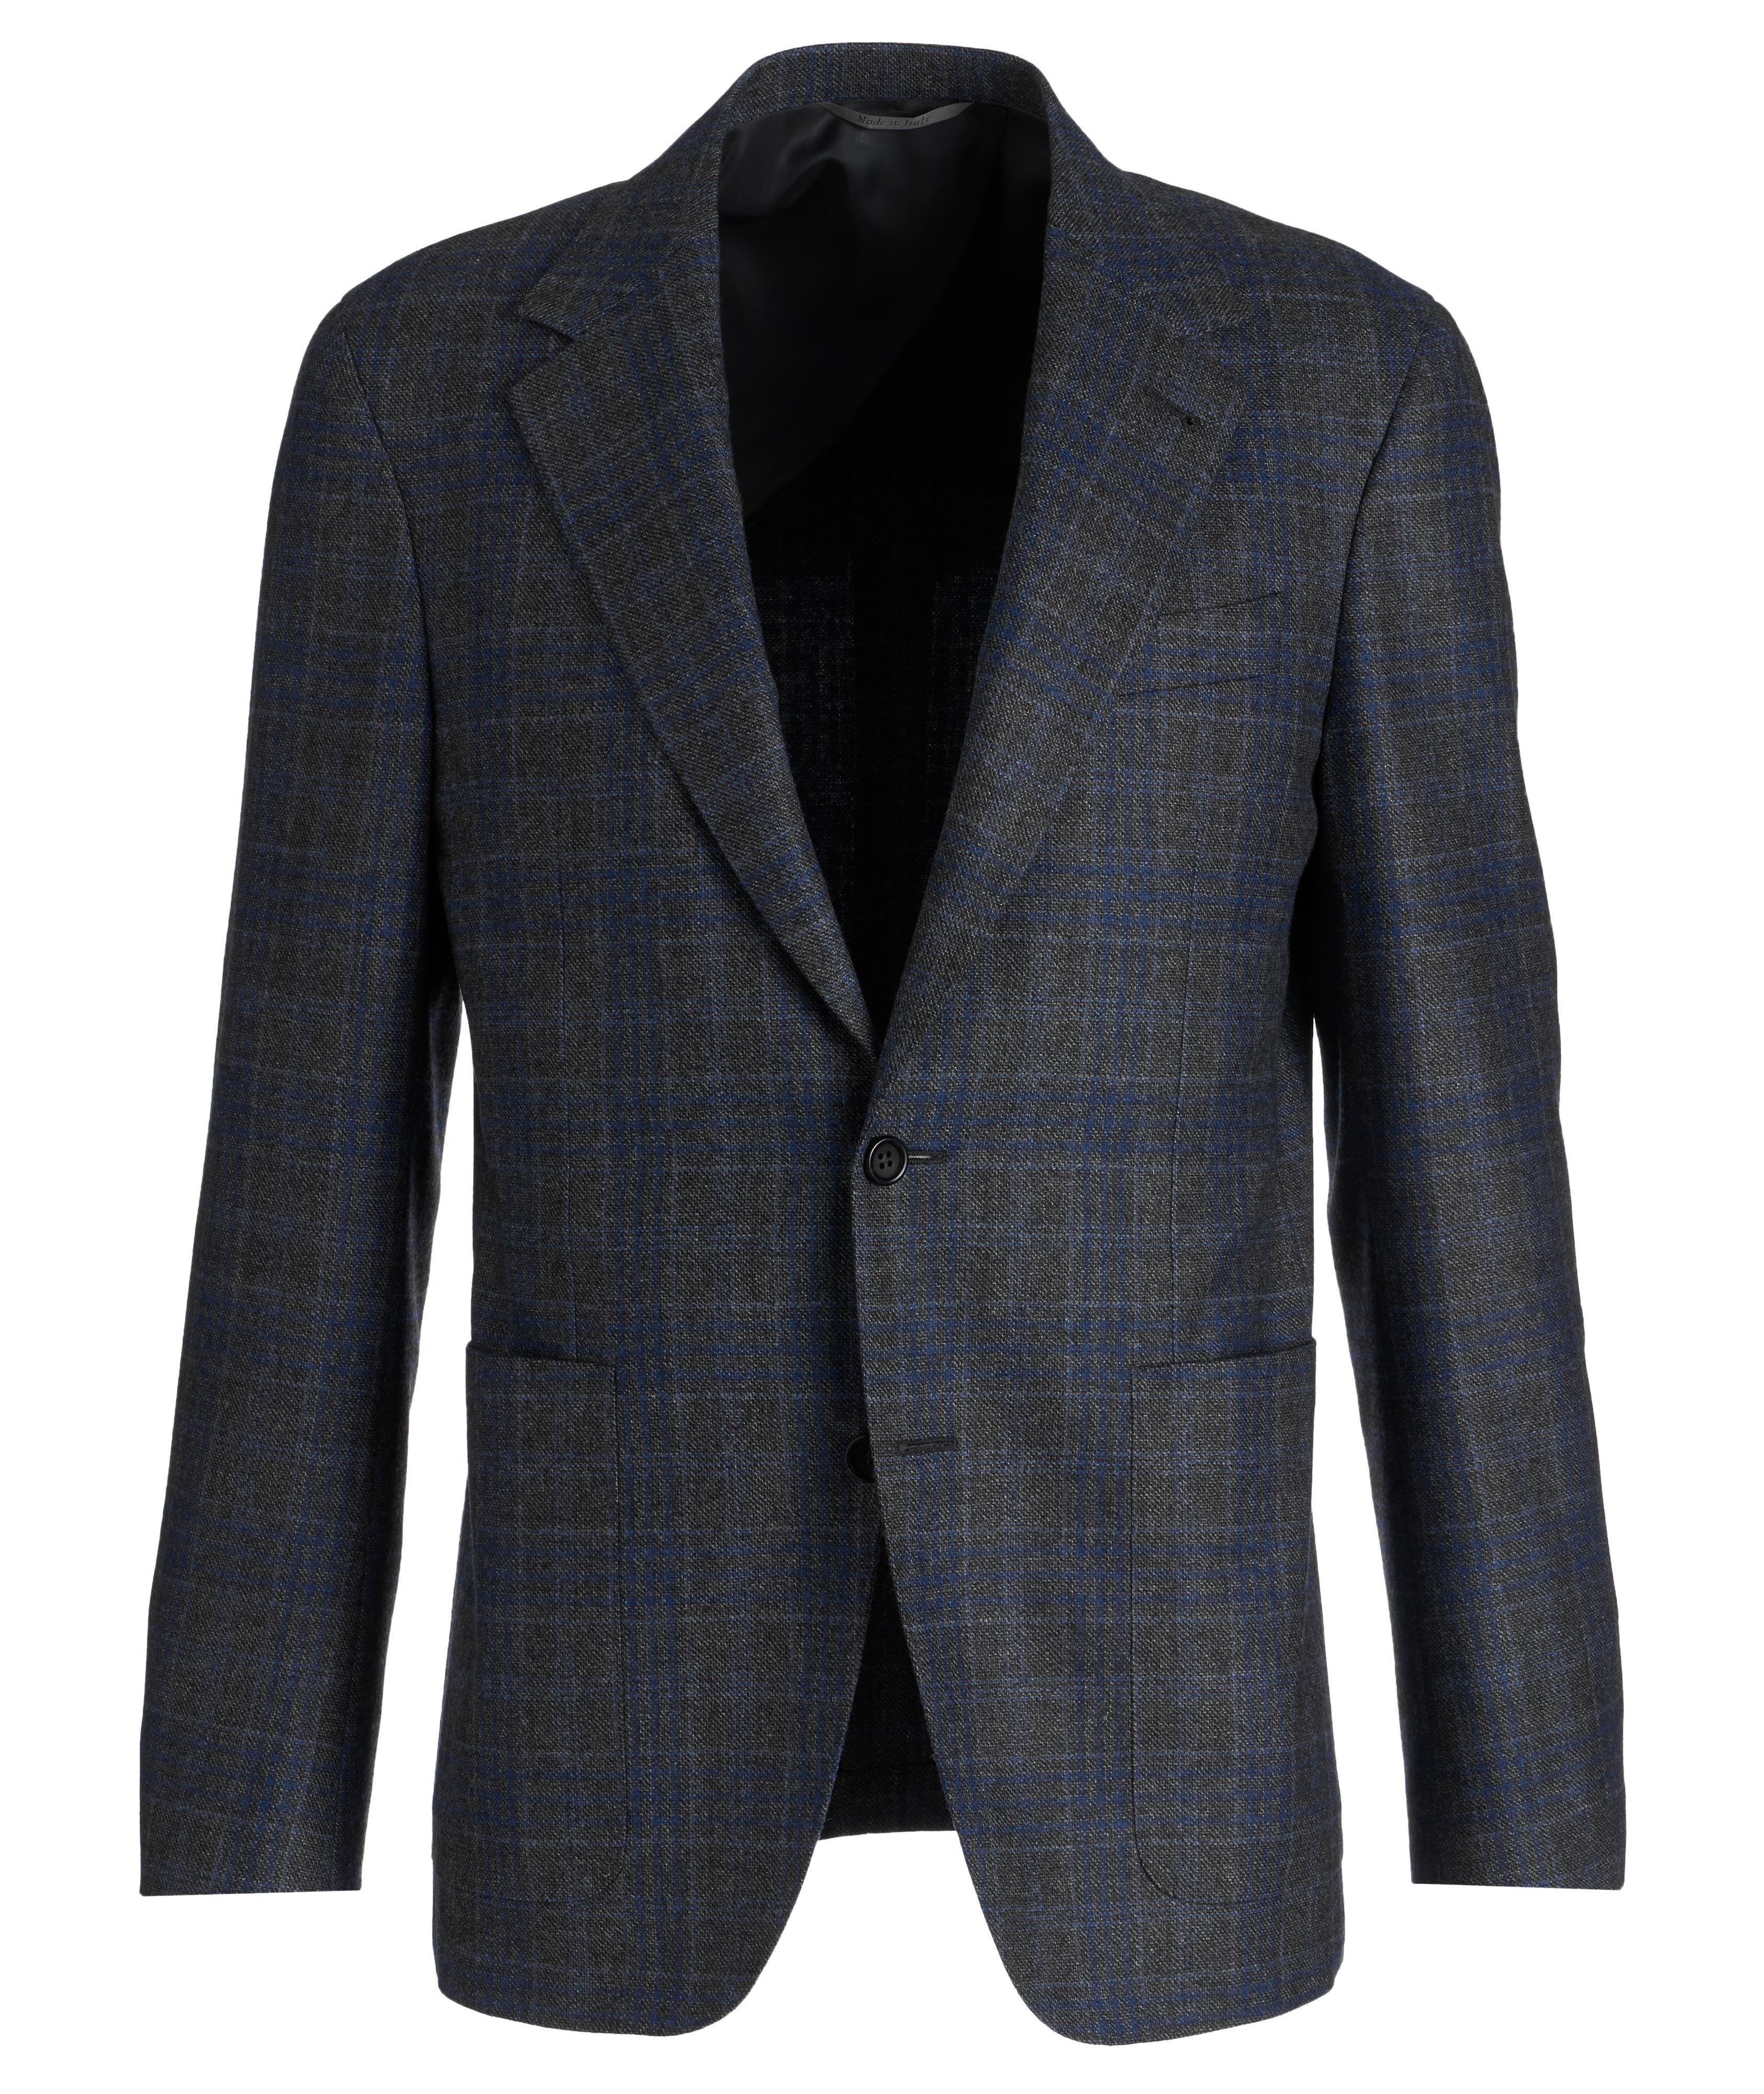 Slim Fit Checked Wool Sports Jacket image 0